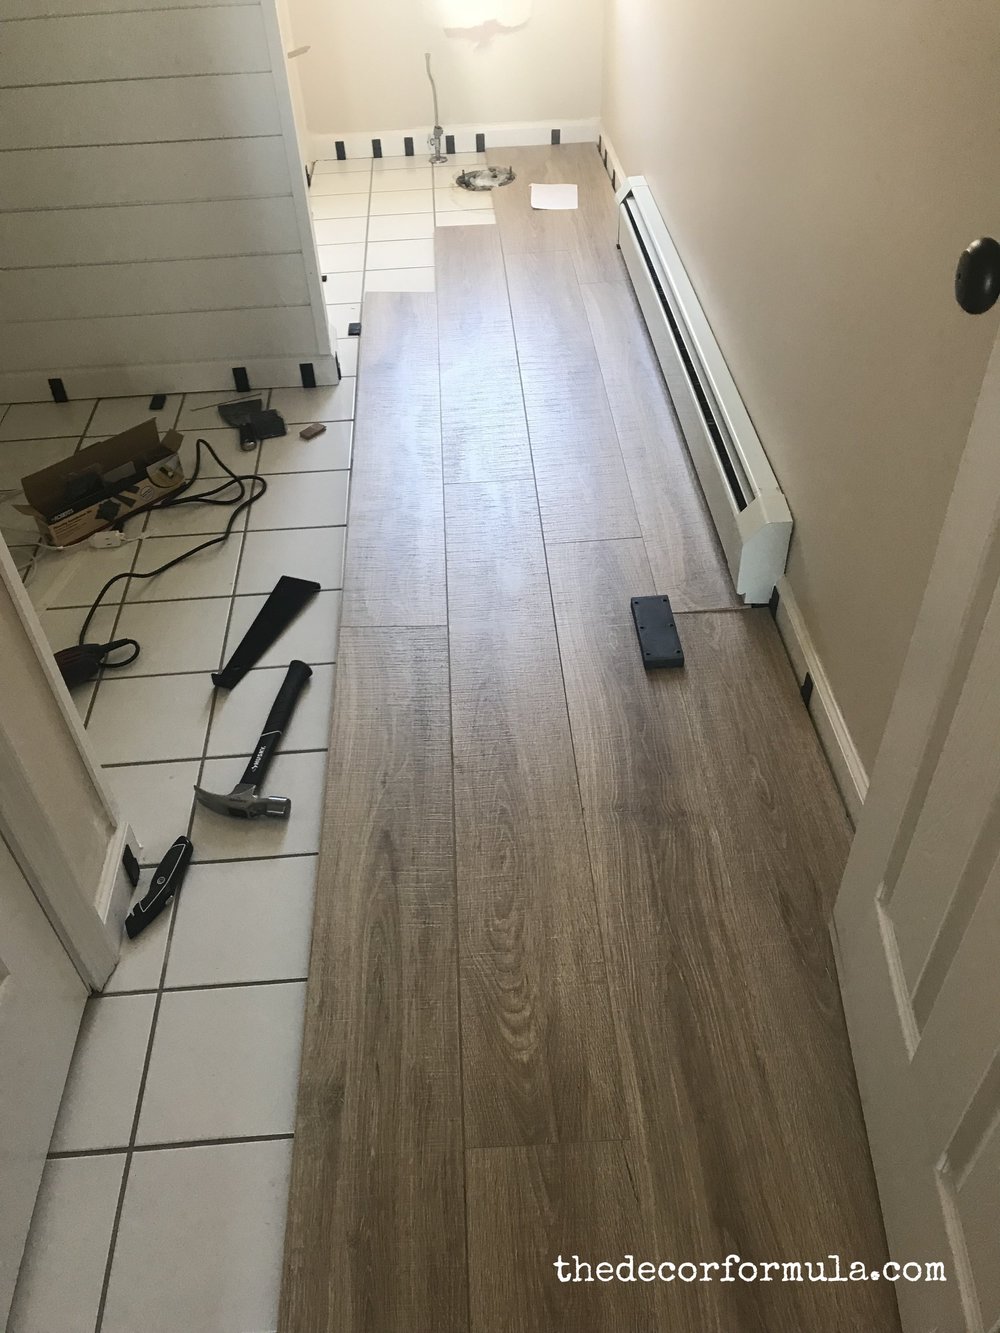 Ideas For Covering Up Tile Floors, What Is The Best Flooring To Go Over Tiles